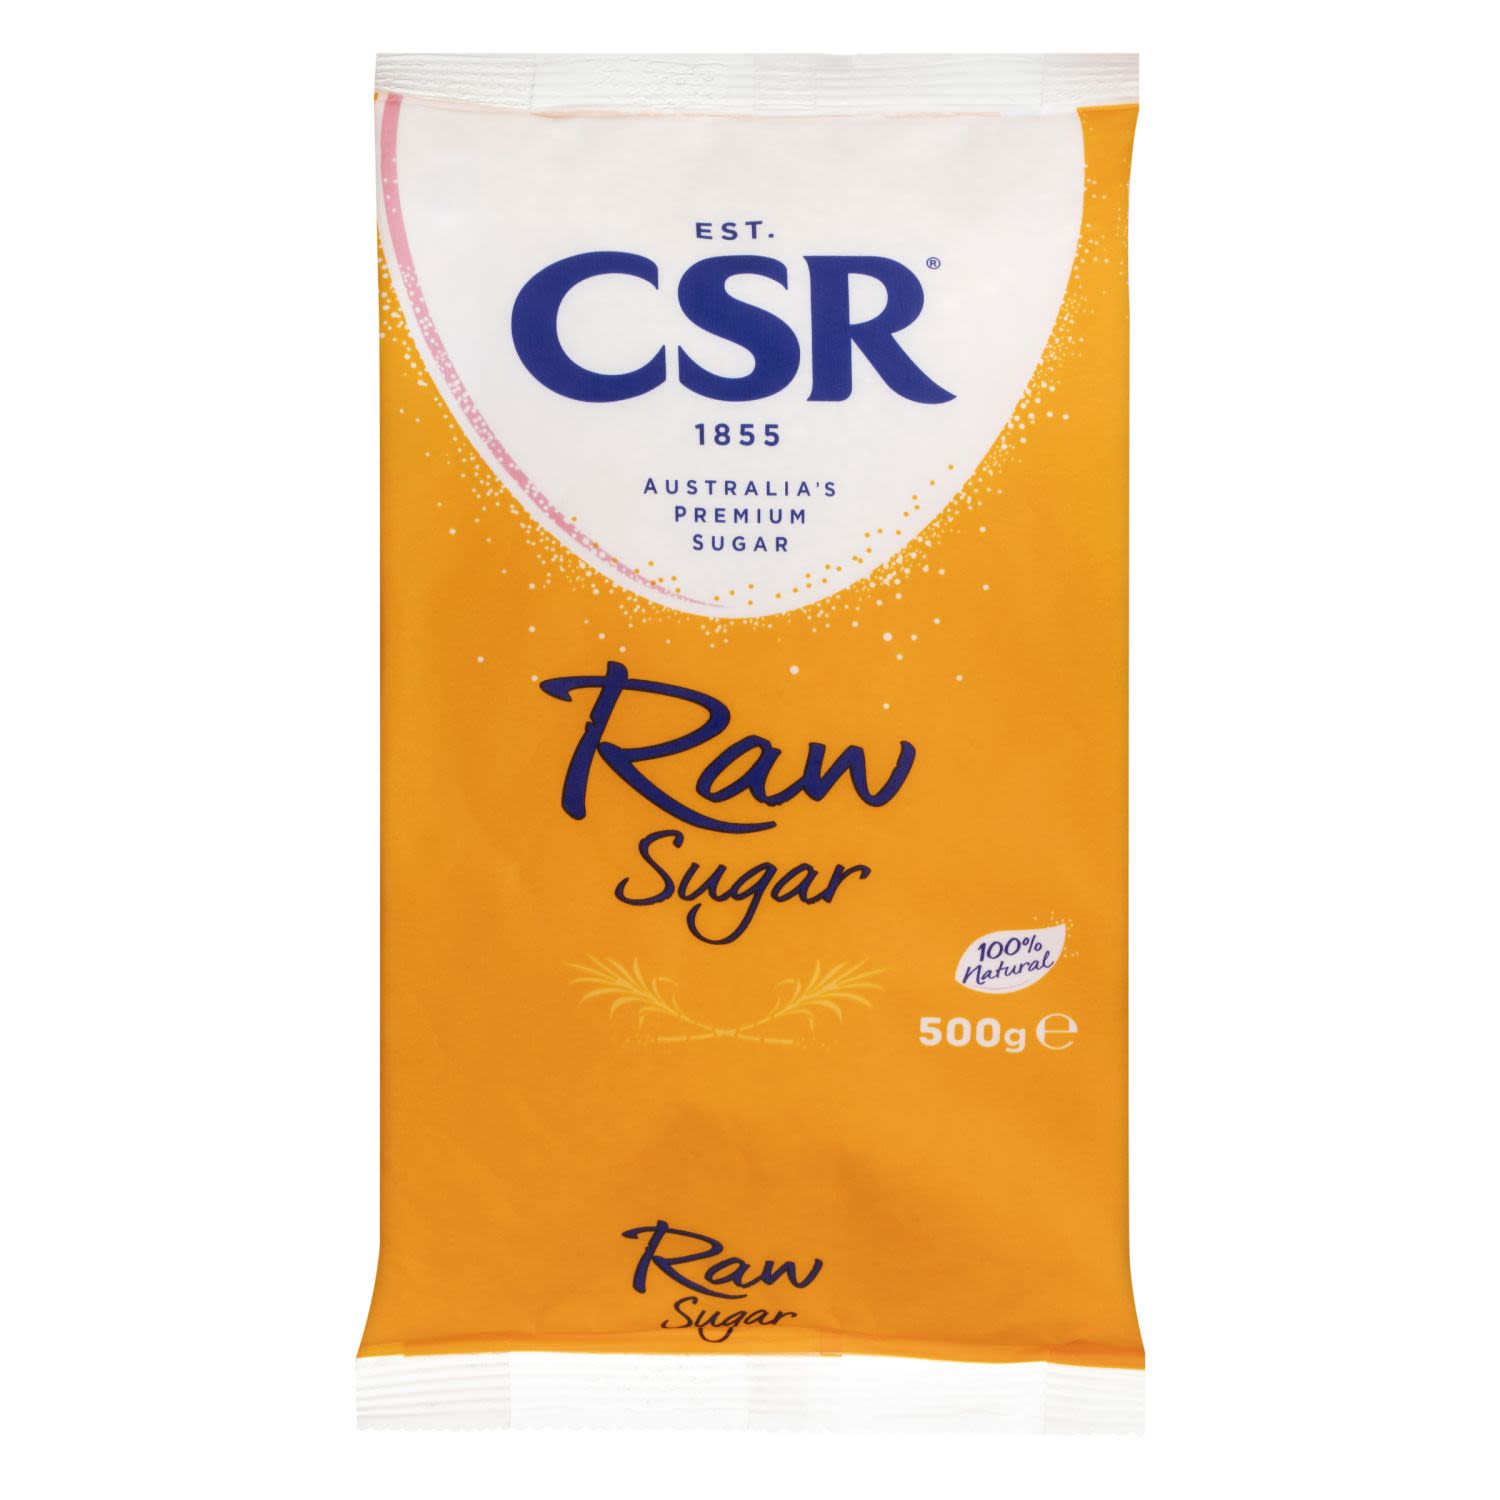 CSR Raw Sugar is a versatile sugar that adds a soft honey-like flavour and warm golden colour to your kitchen creations. Great-tasting and cut from the wholesome sweet juice of natural Australian sugarcane, it's a pantry must-have whether you're cooking a sweet & spicy dish or making your favourite dessert.<br /> <br /> <br /><br />Country of Origin: Product of Australia